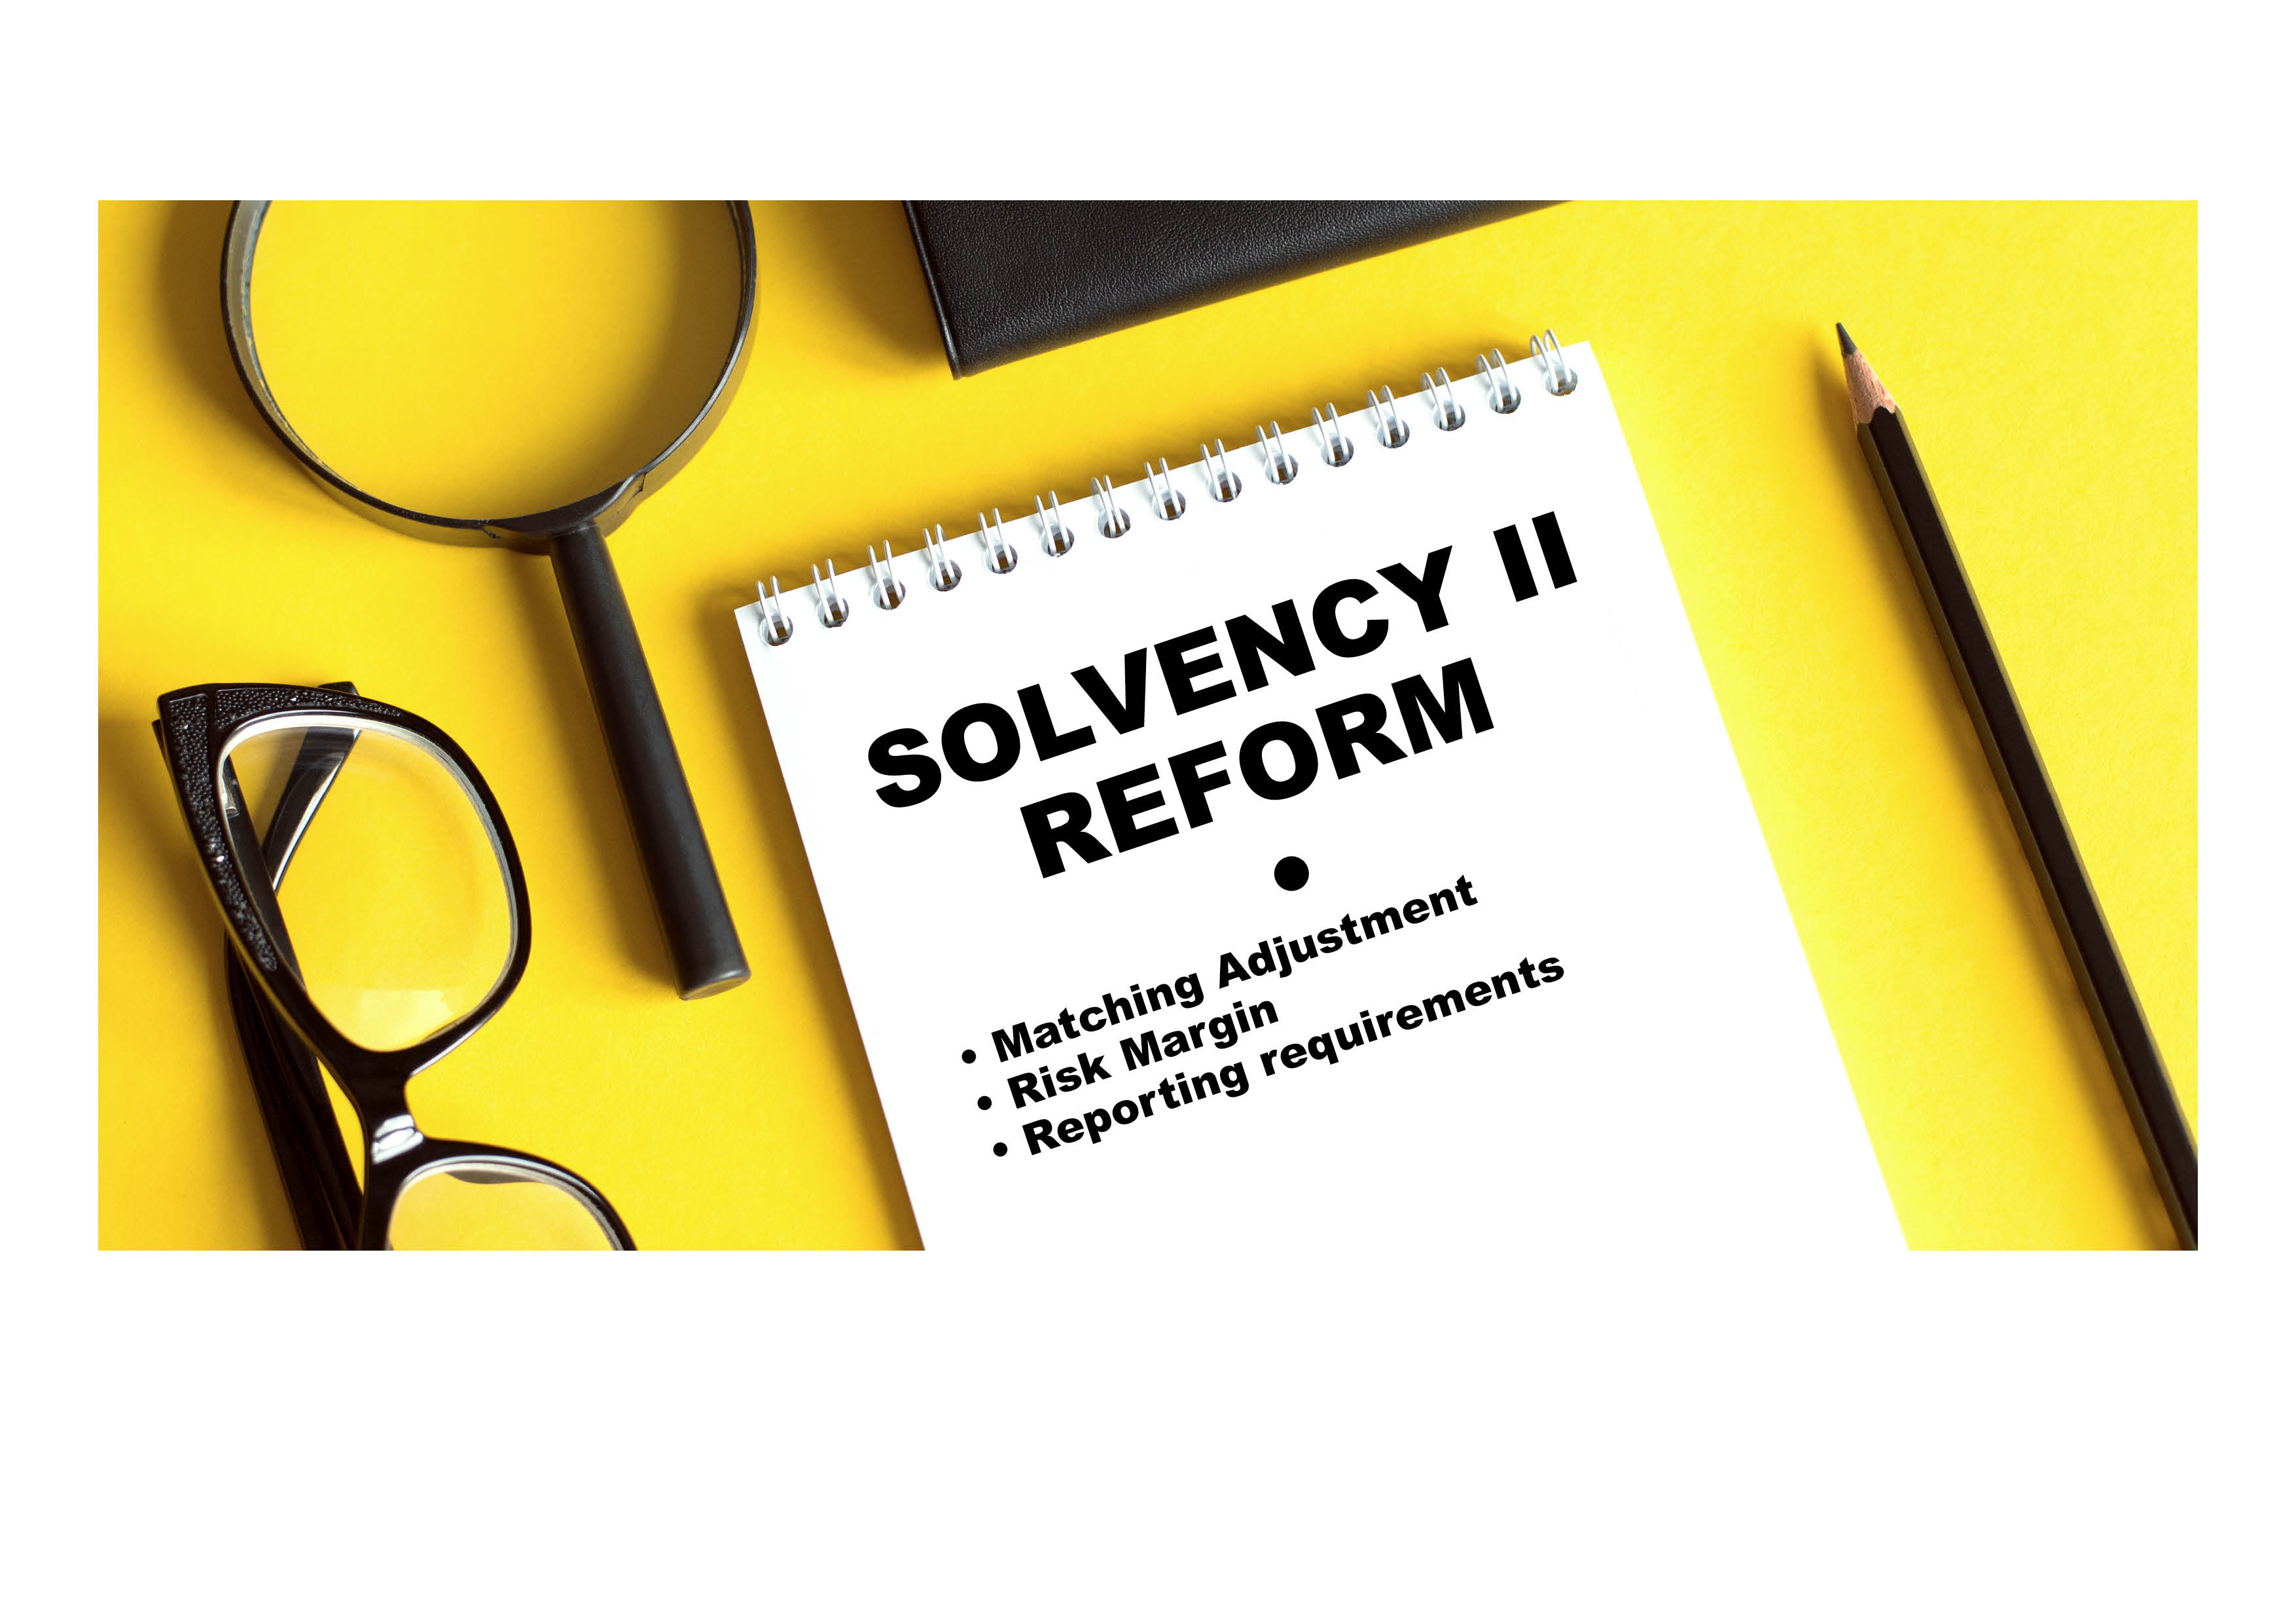 Battle lines drawn over Solvency reforms